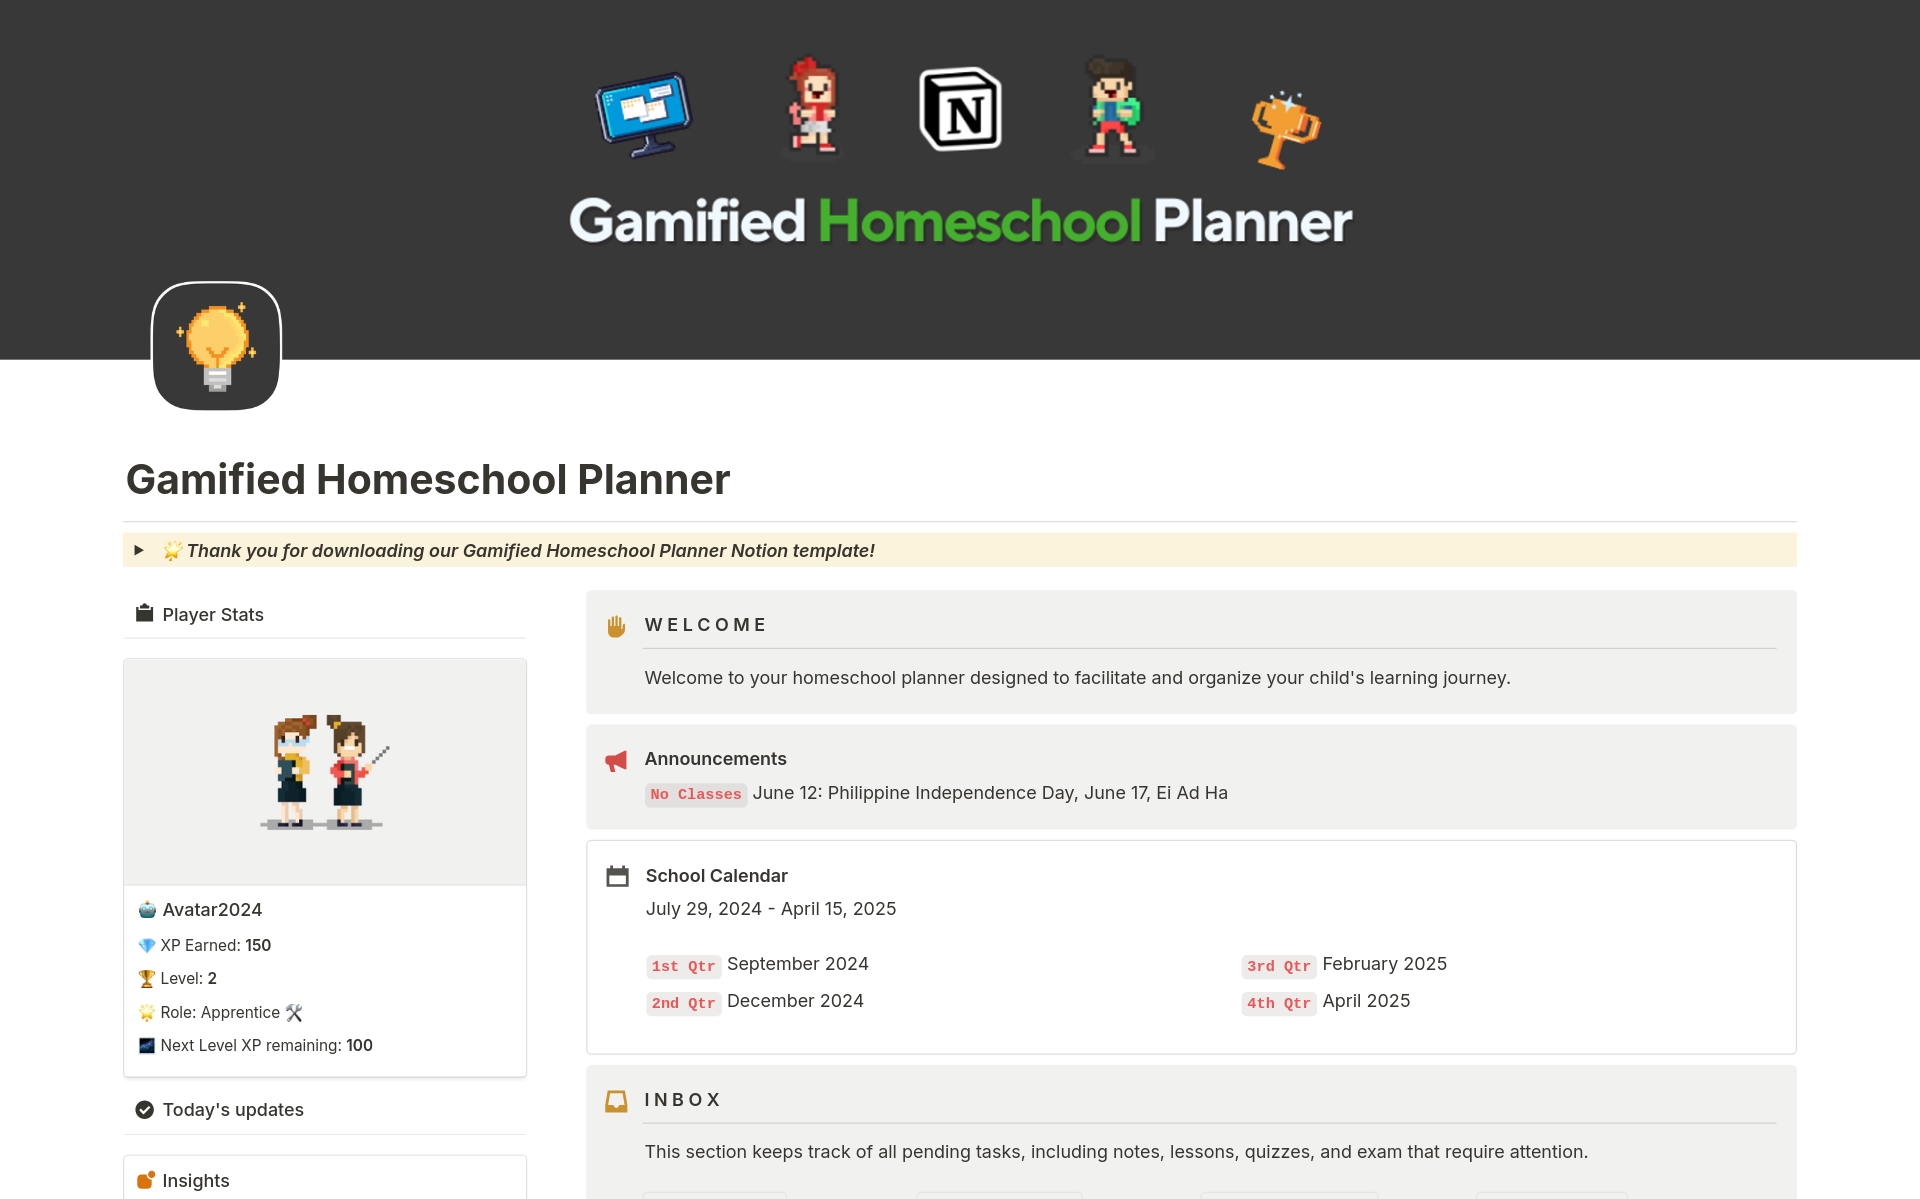 Transform your homeschooling journey with the Gamified Homeschool Planner Notion Template. Organize lessons, track student progress, and manage educational resources with a fun, interactive approach that keeps you or your students motivated and engaged.